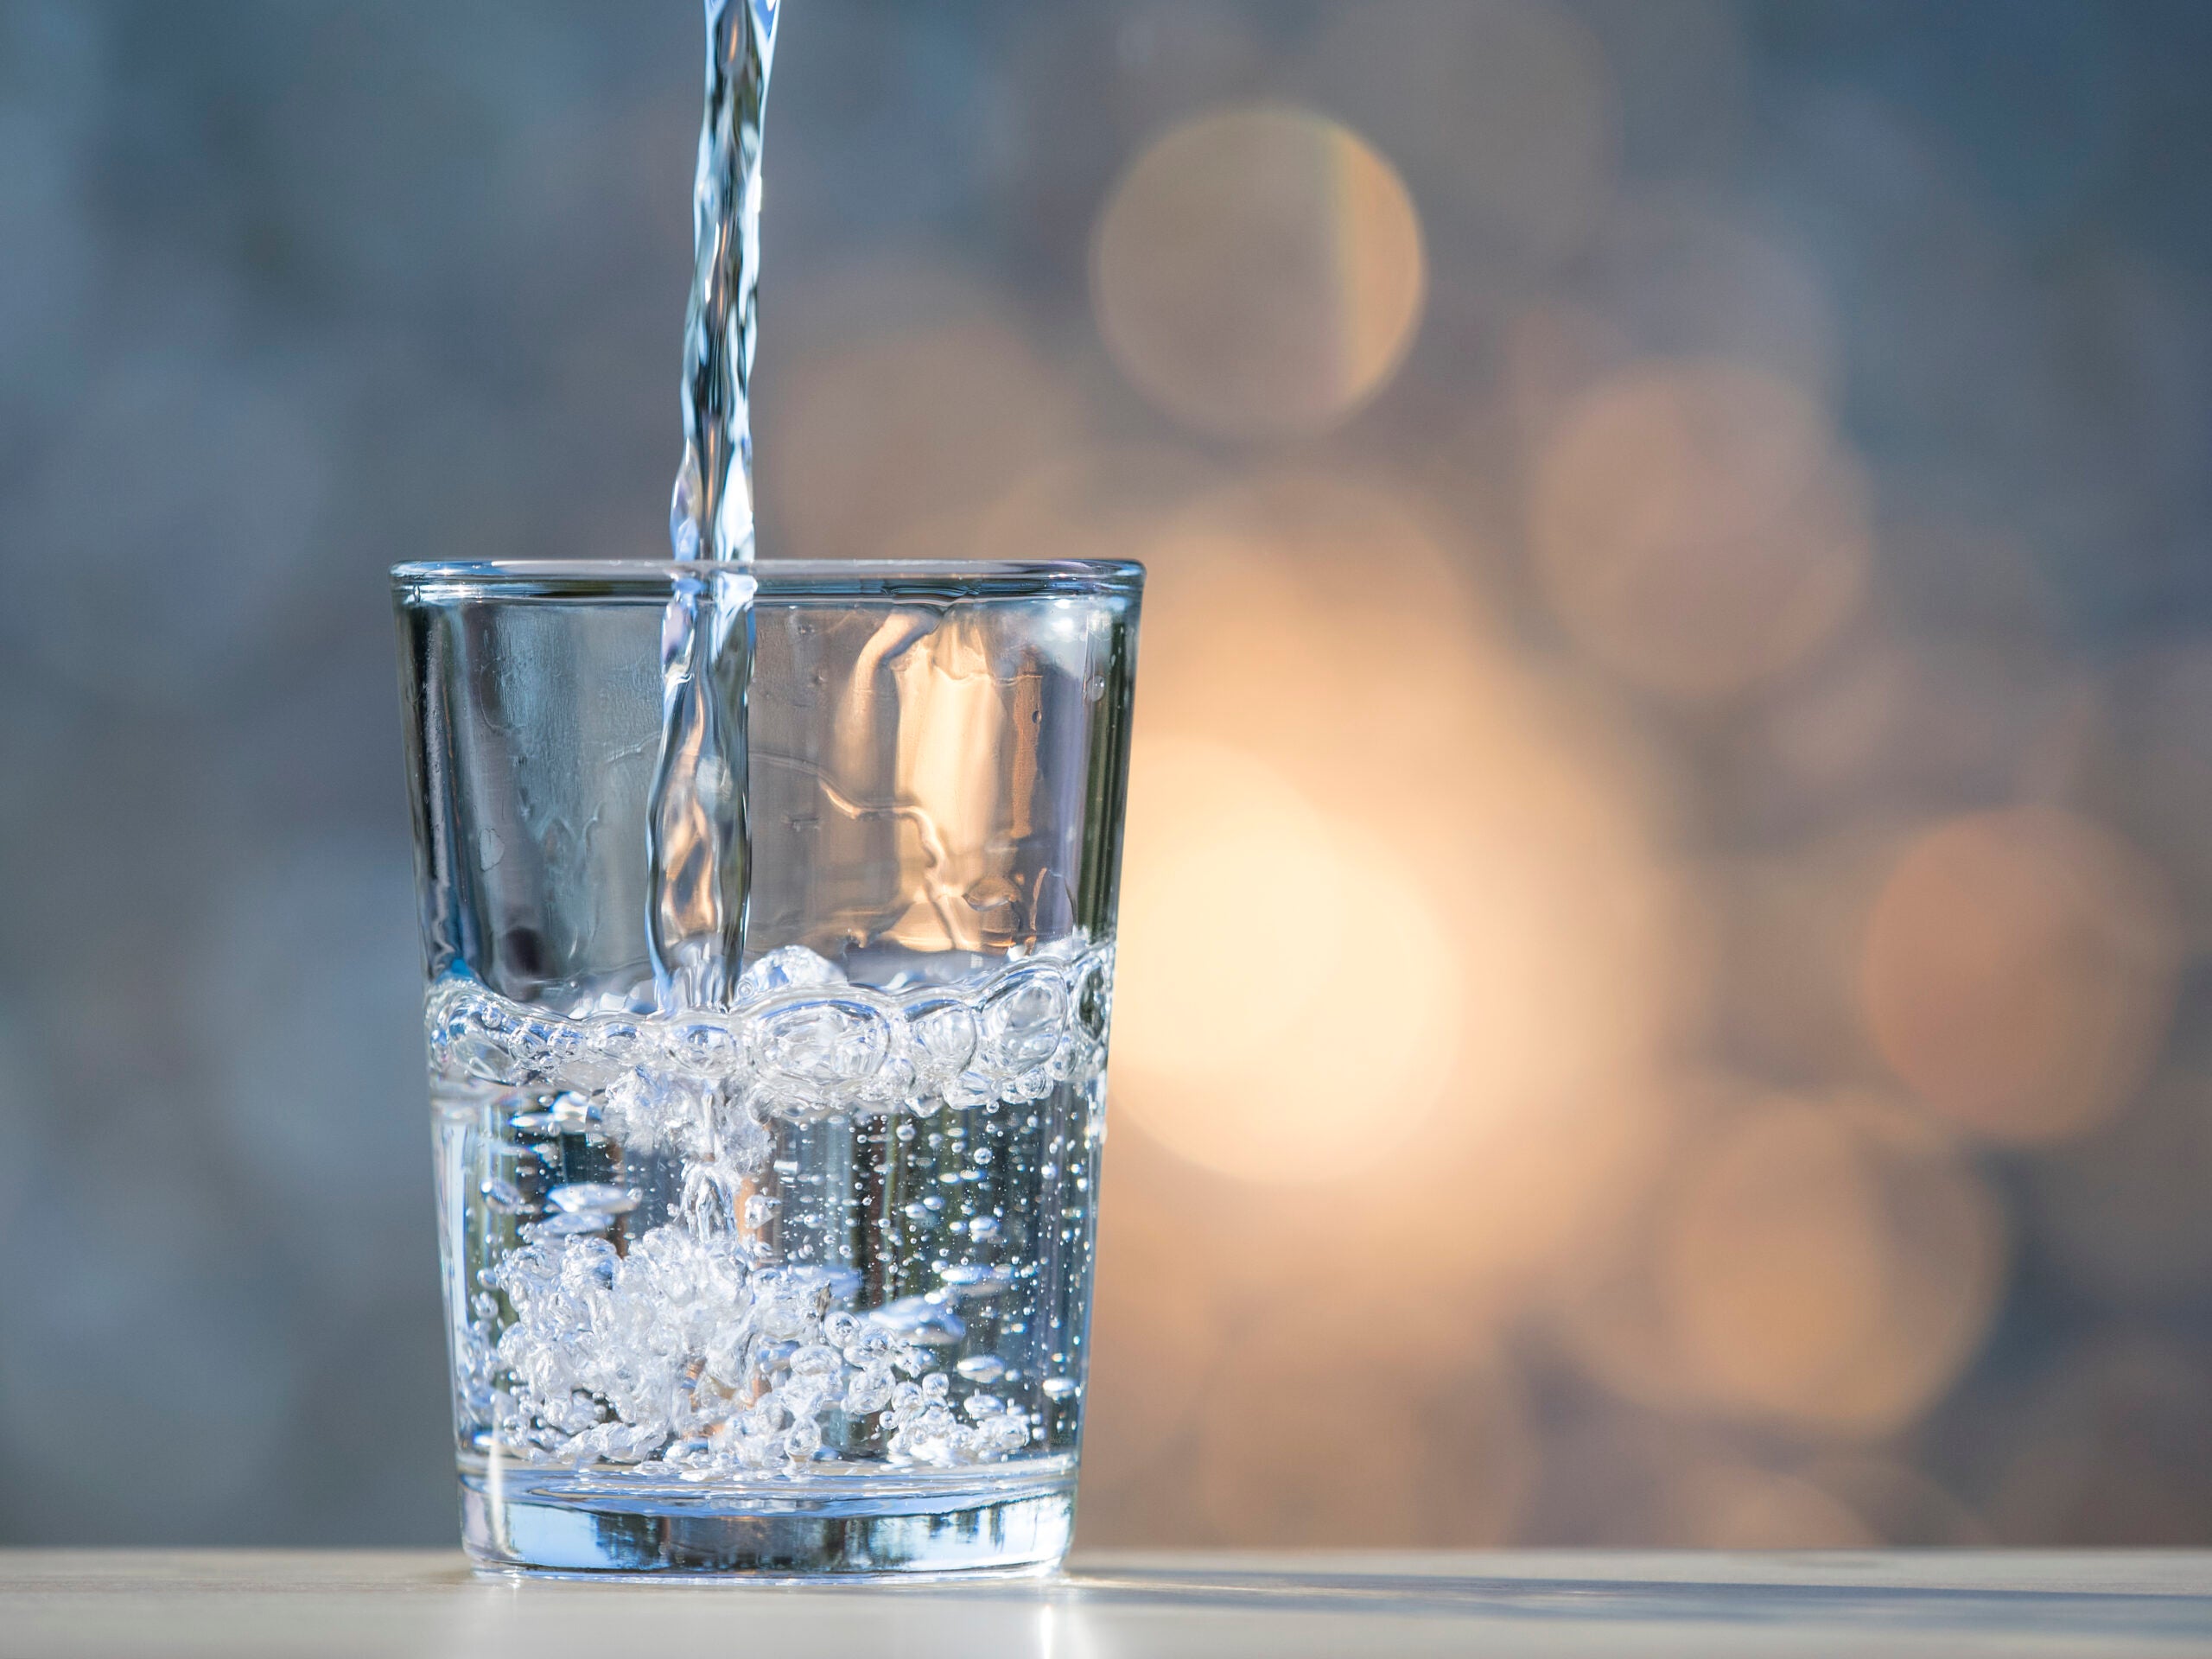 As drinking water is one of the most common routes of exposure to PFAS, no level of cancer-causing, toxic chemicals PFAS should be allowed in our drinking water.
(Jose A. Bernat Bacete / Getty Images)